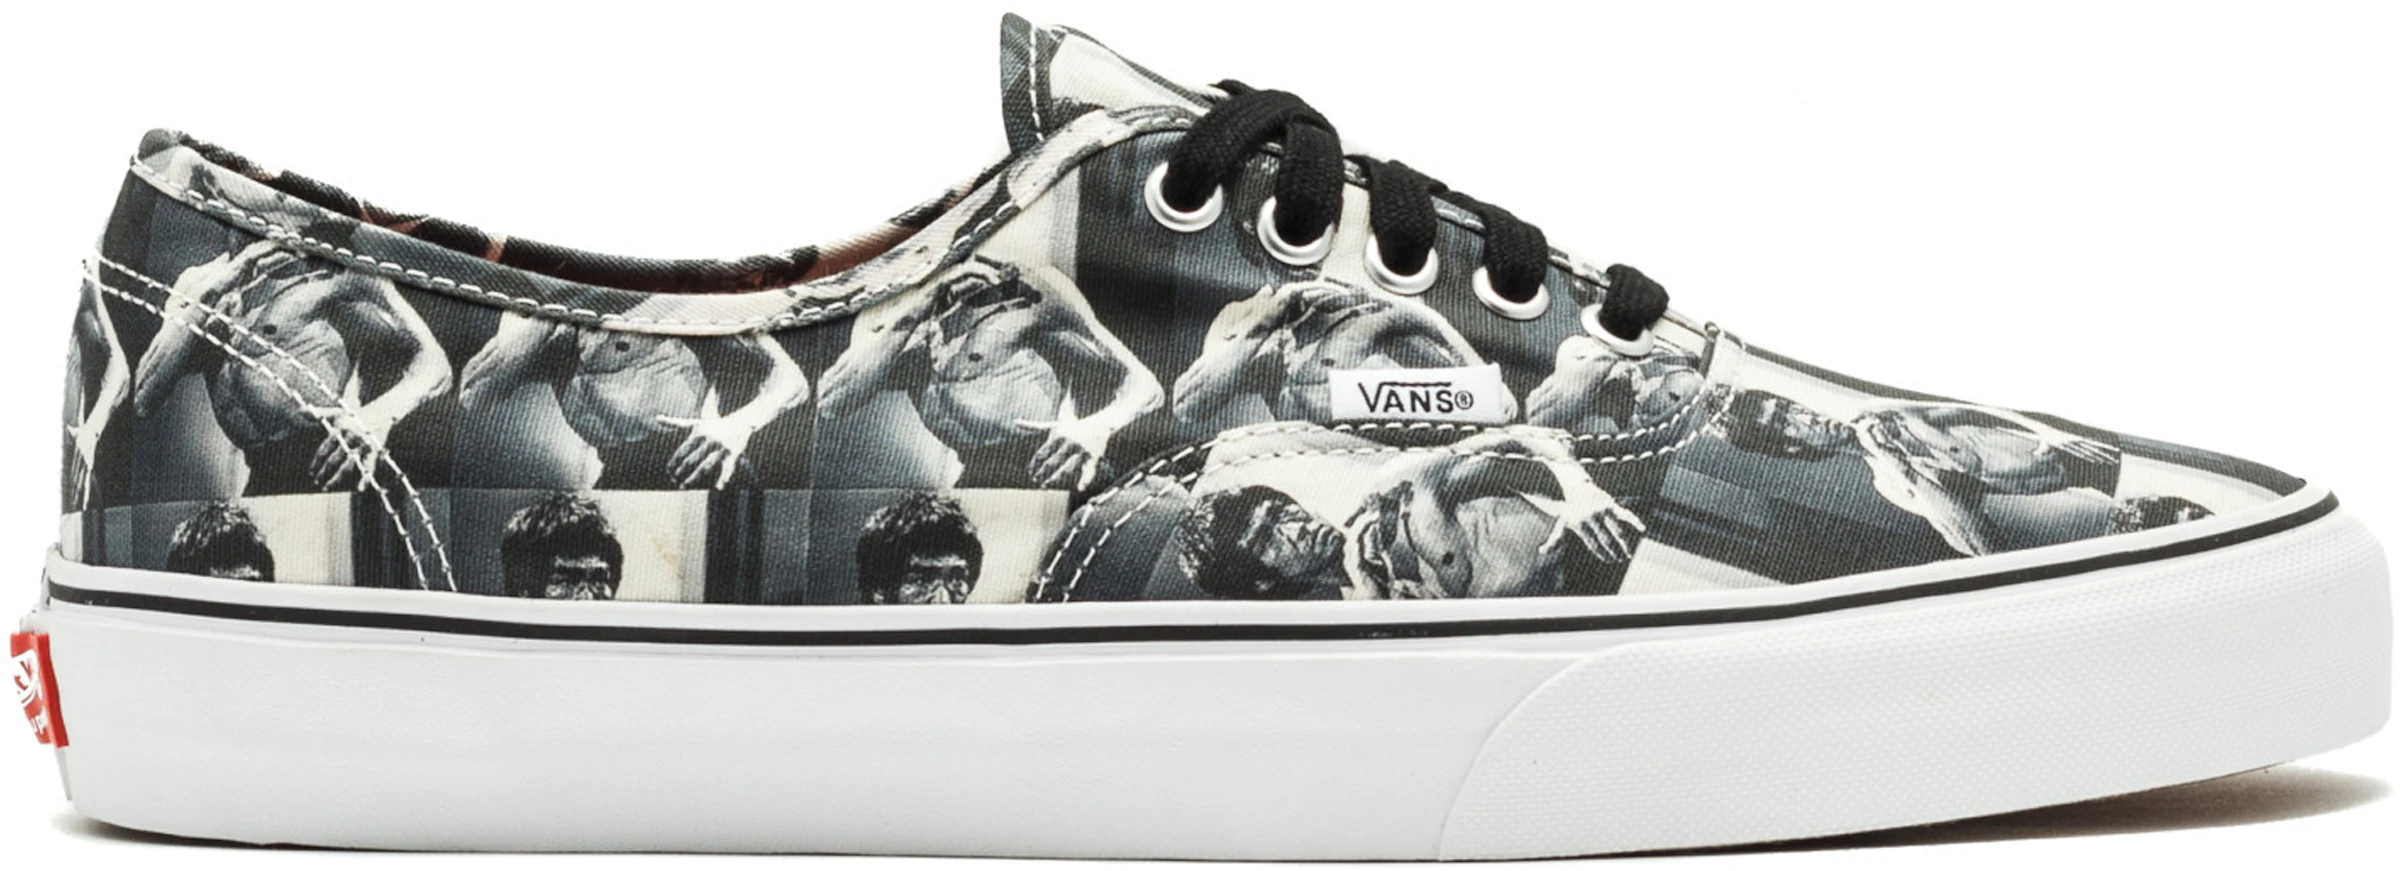 Vans Authentic Supreme Bruce Lee (White) - VN0000ANM - US